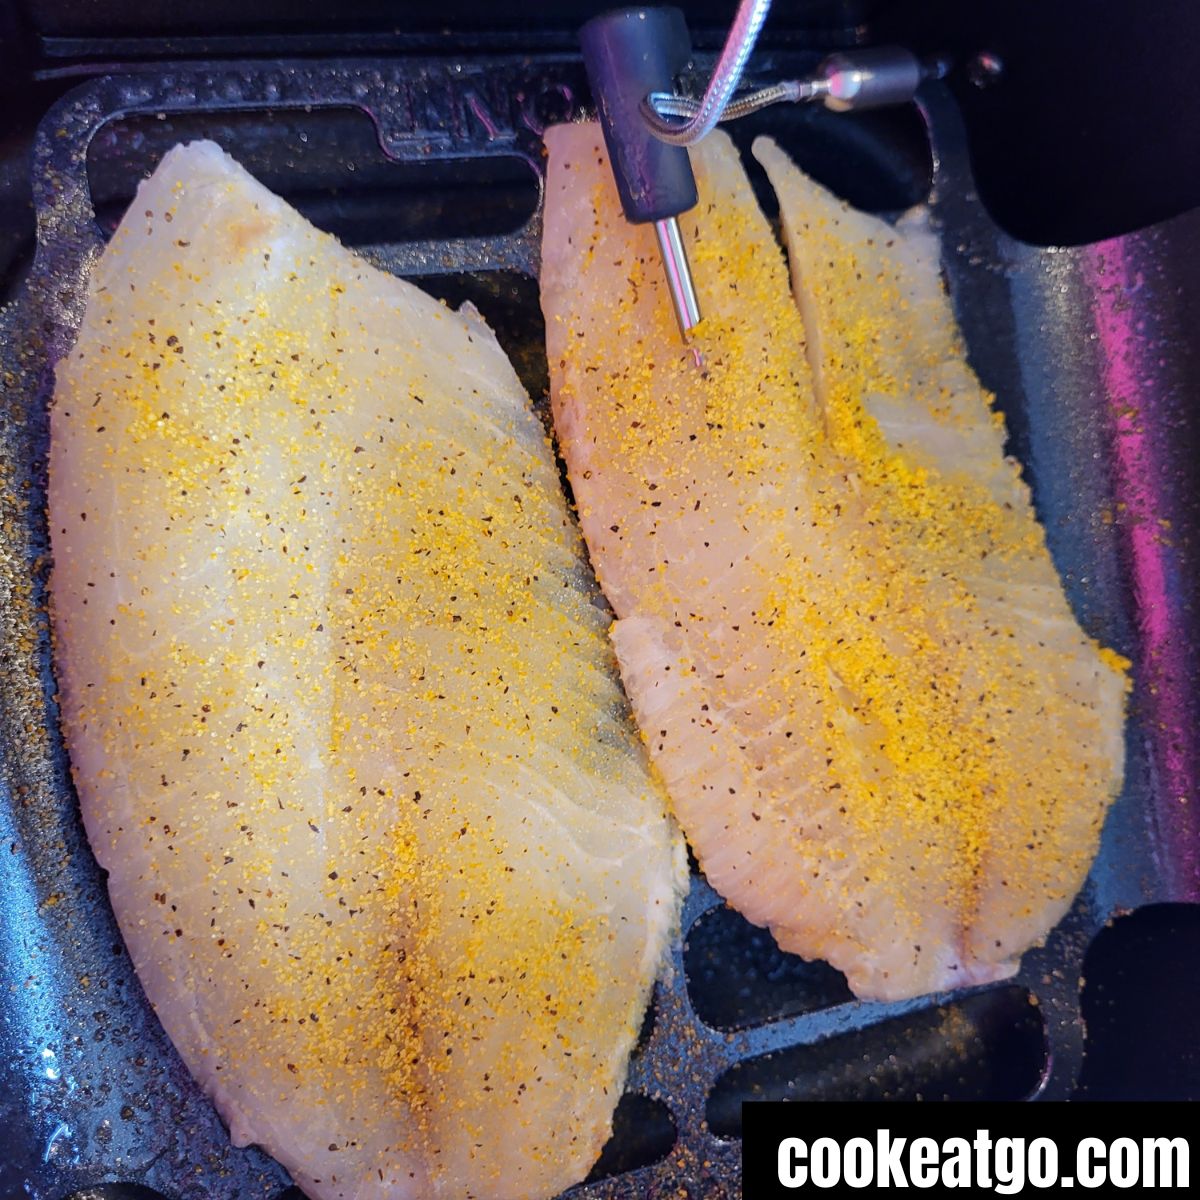 Weight Watchers Air Fryer Tilapia seasoned with lemon pepper in dreo chefmaker with temperature probe